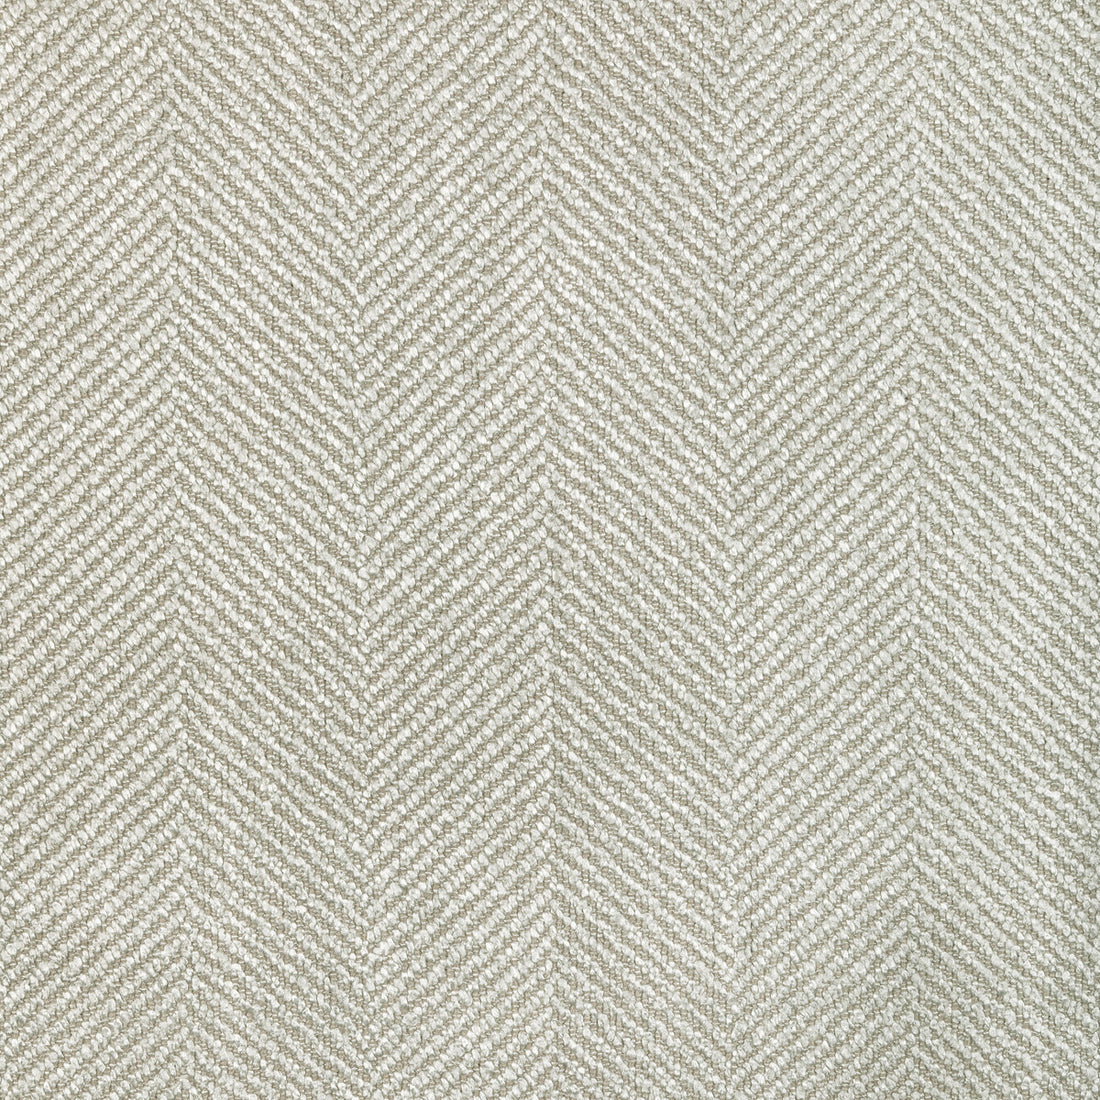 Kravet Contract fabric in 34637-1511 color - pattern 34637.1511.0 - by Kravet Contract in the Crypton Incase collection